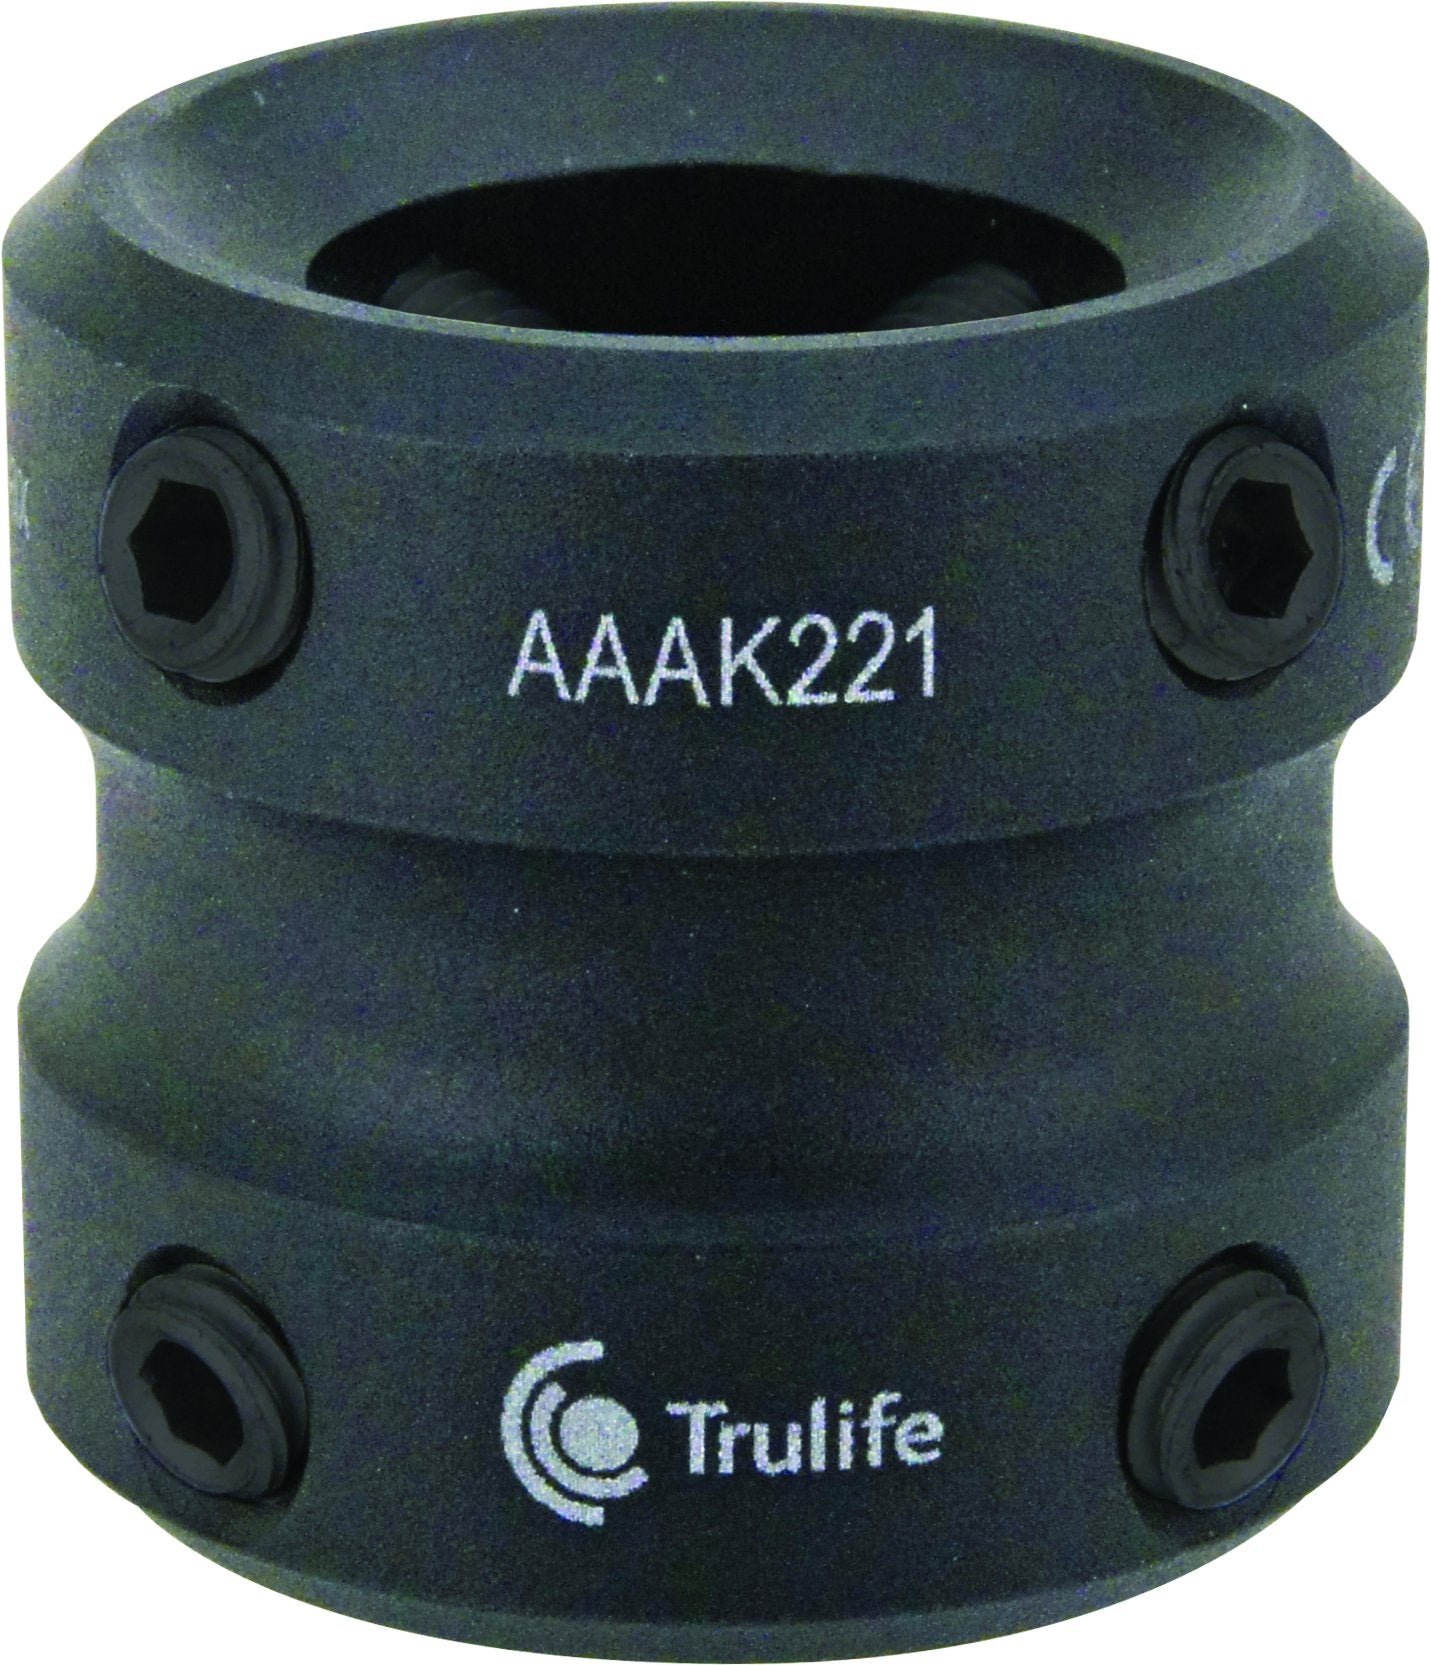 AAAK221 Child’s Play Double-Ended Adapter